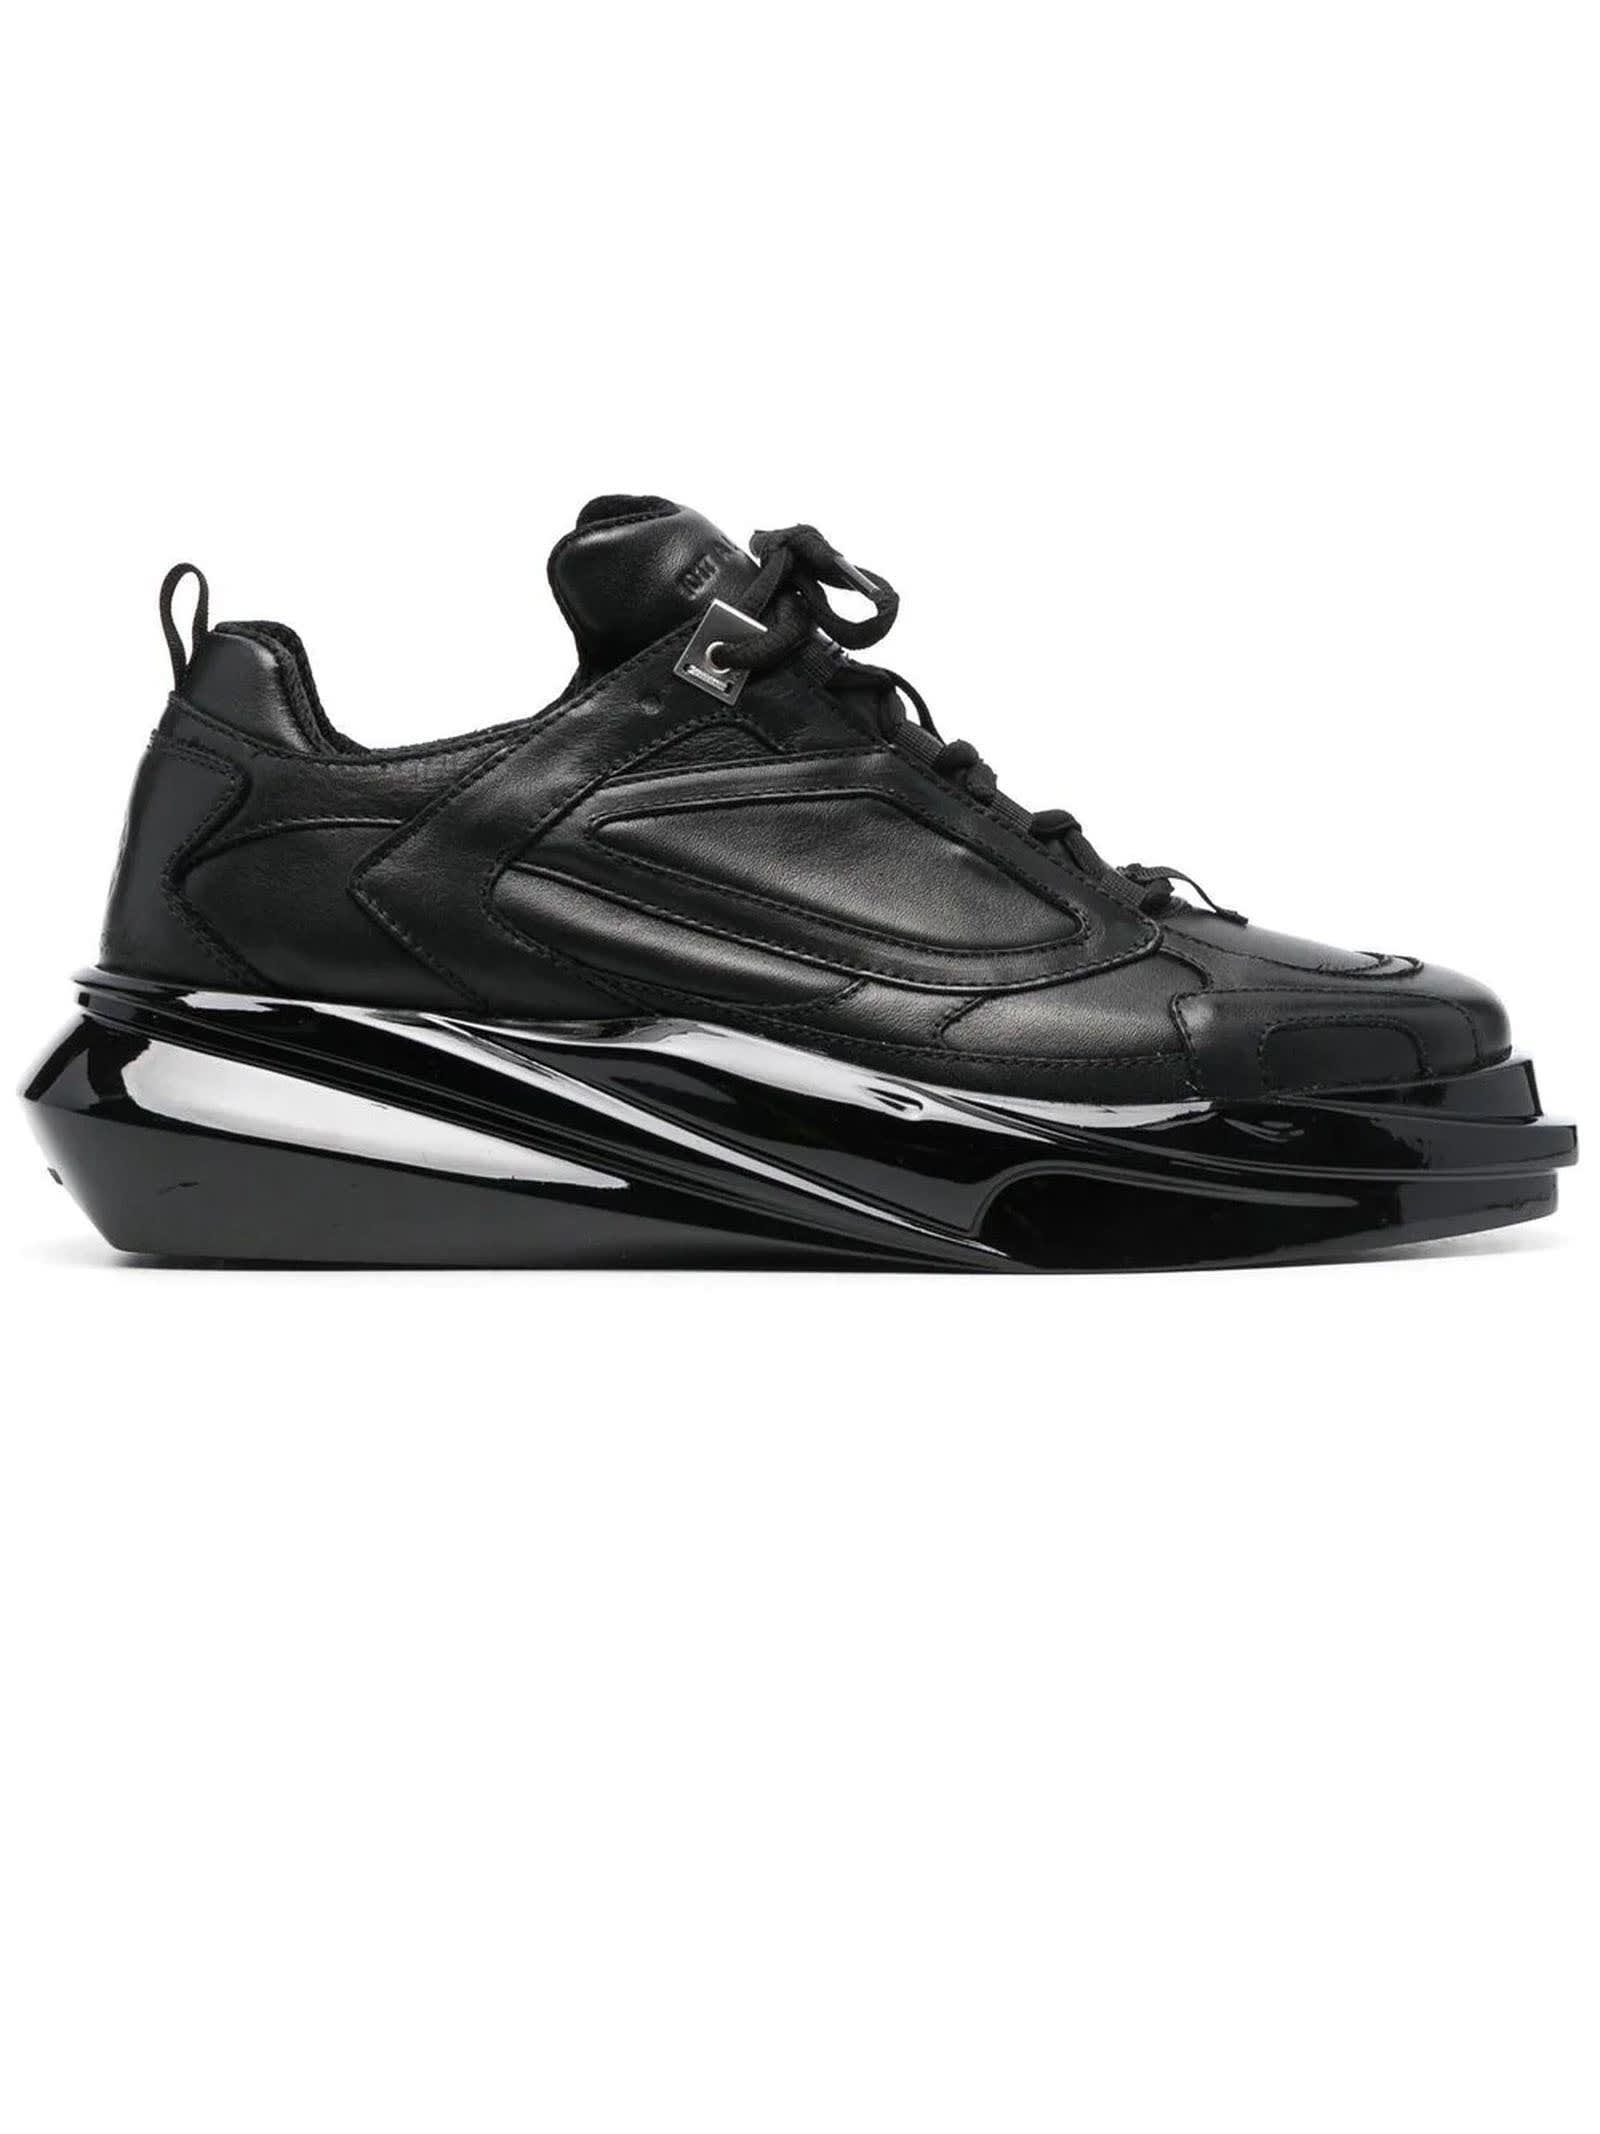 1017 ALYX 9SM Black Calf Leather Sneakers